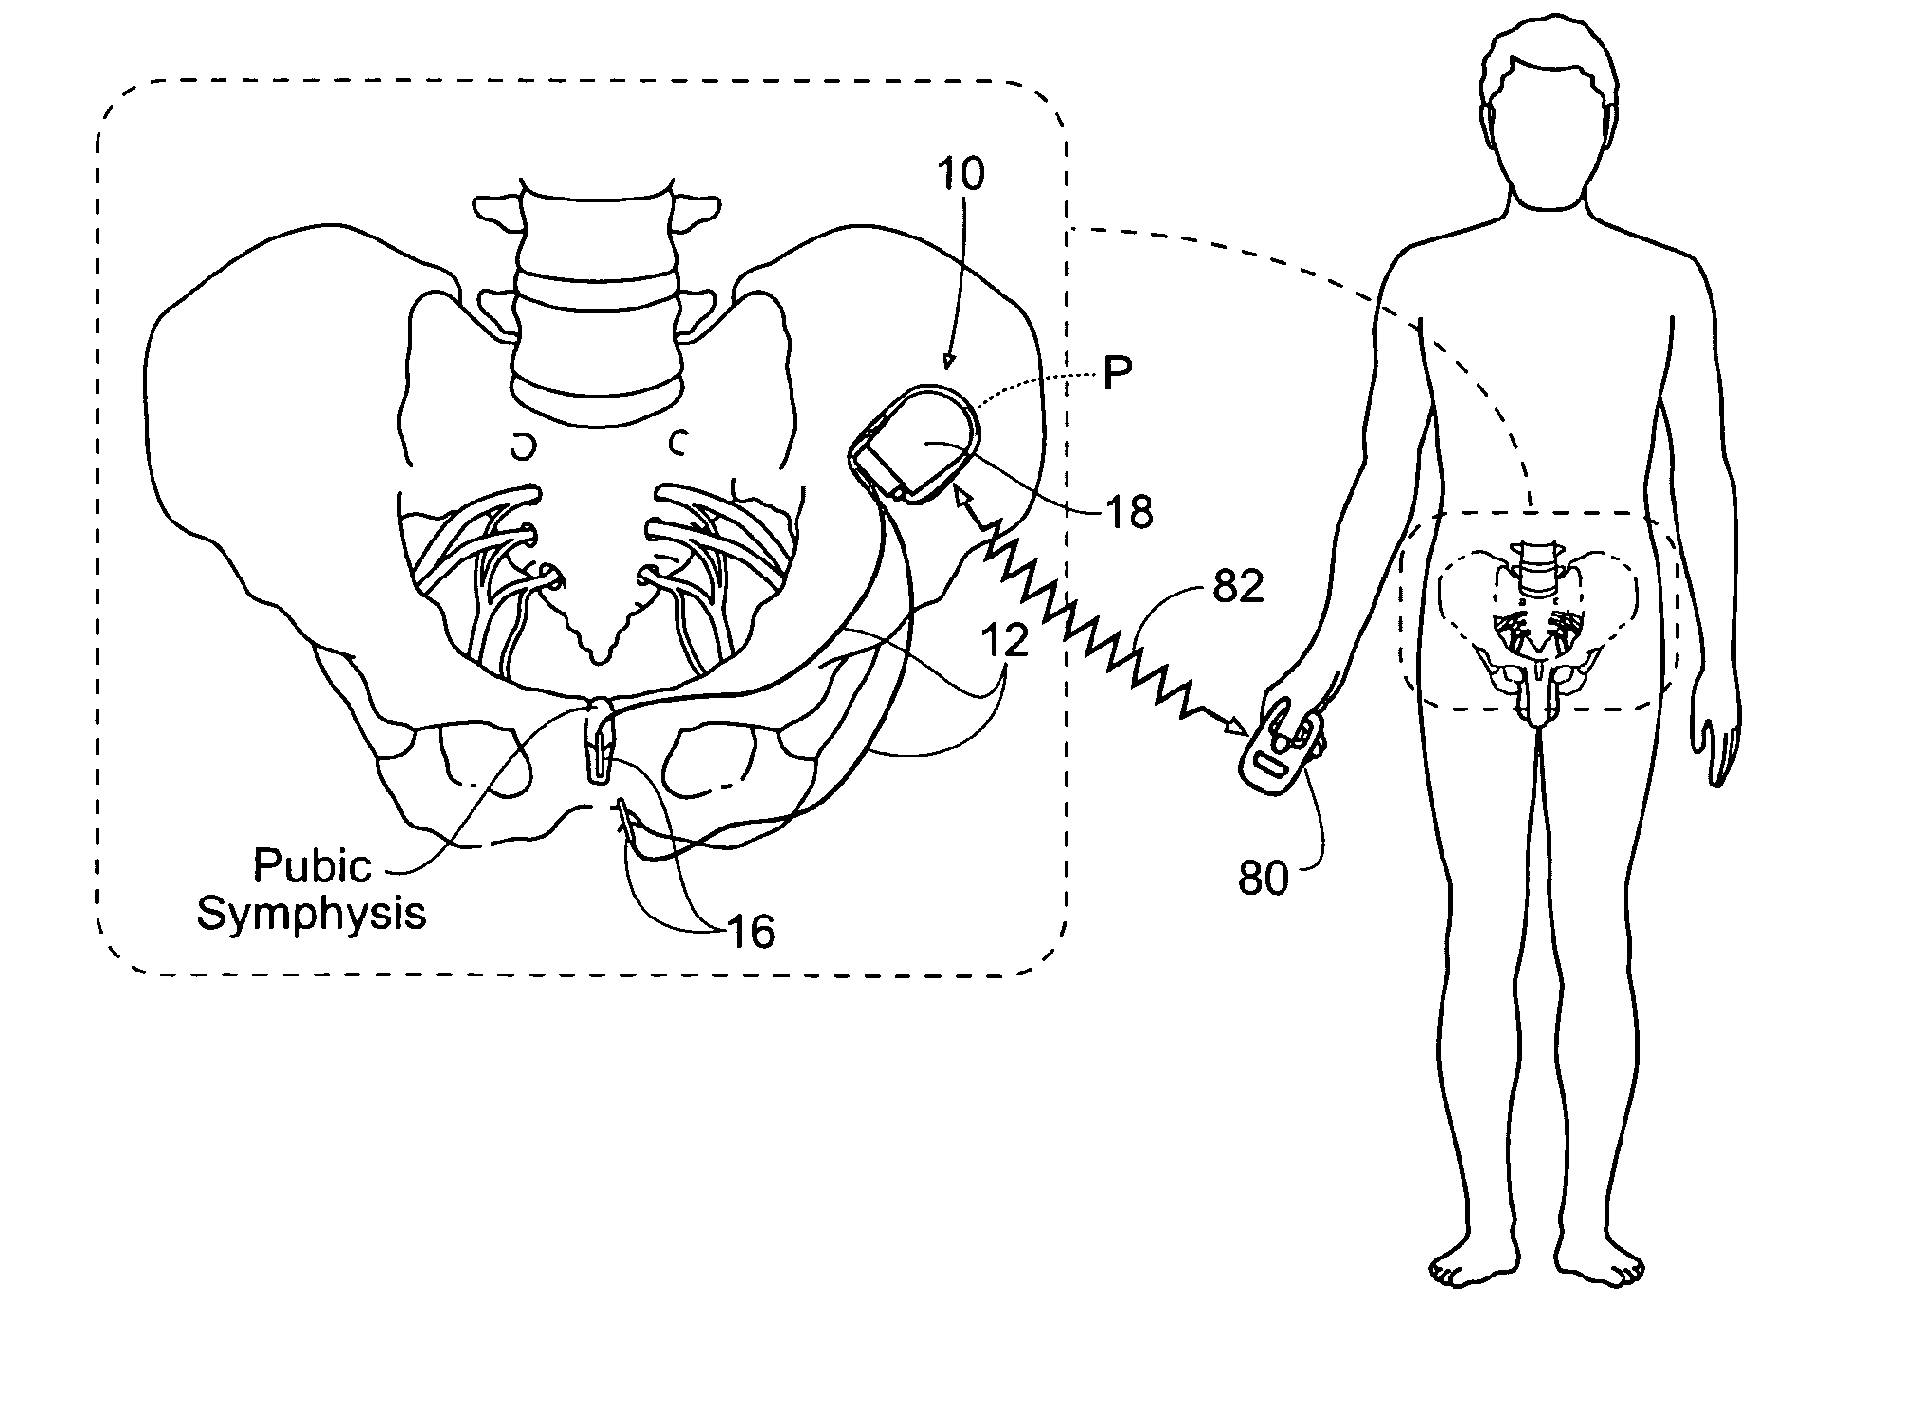 Systems and methods for the treatment of bladder dysfunctions using neuromodulation